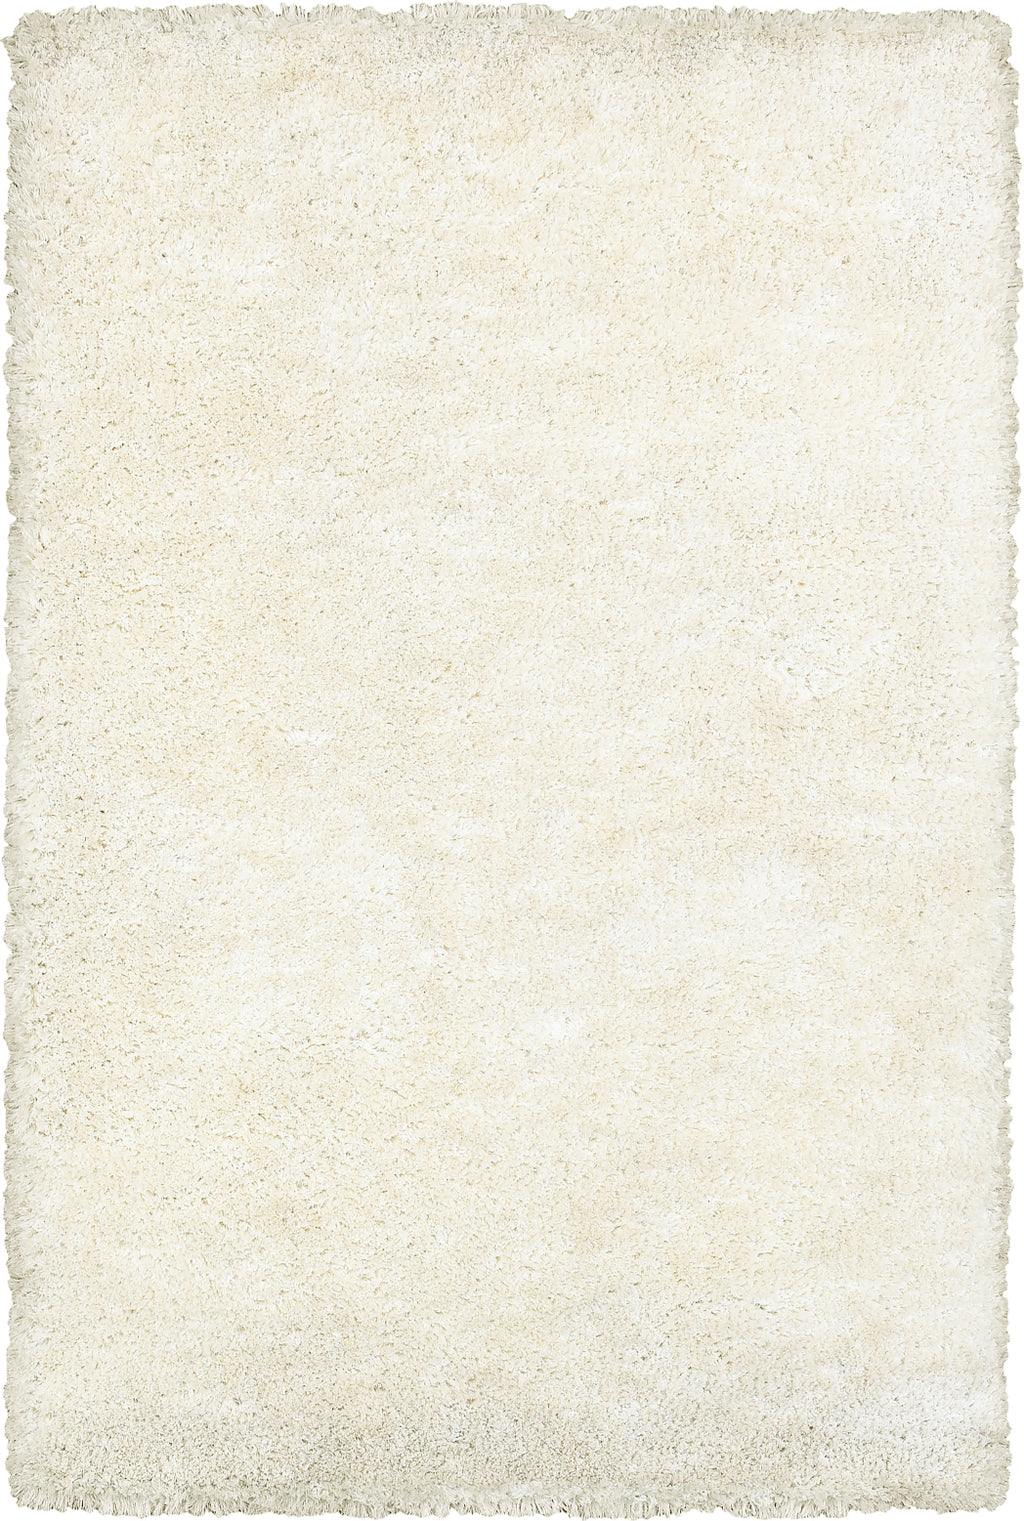 LR Resources Serenity 19011 White Area Rug main image